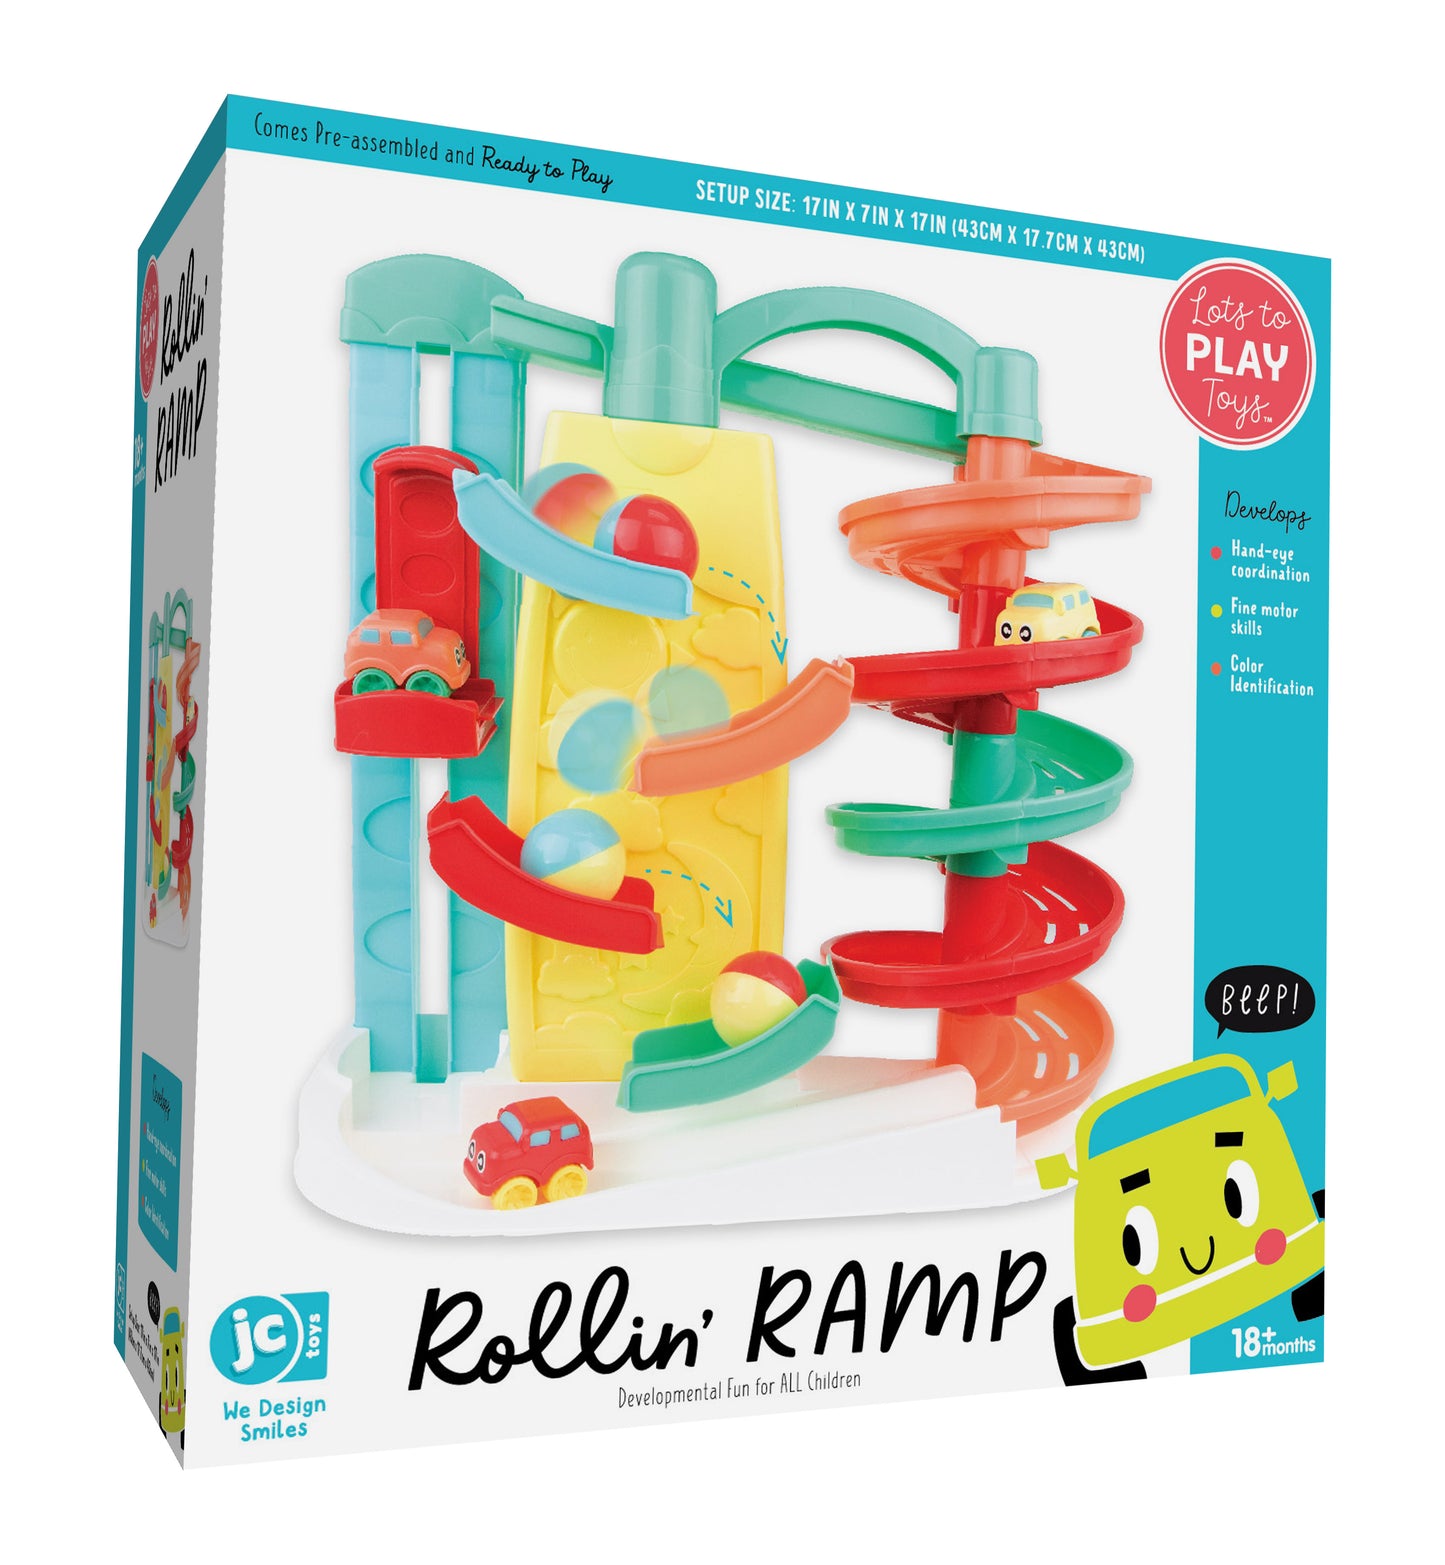 Lots to Play Toys ® Rollin Ramp Car Park.